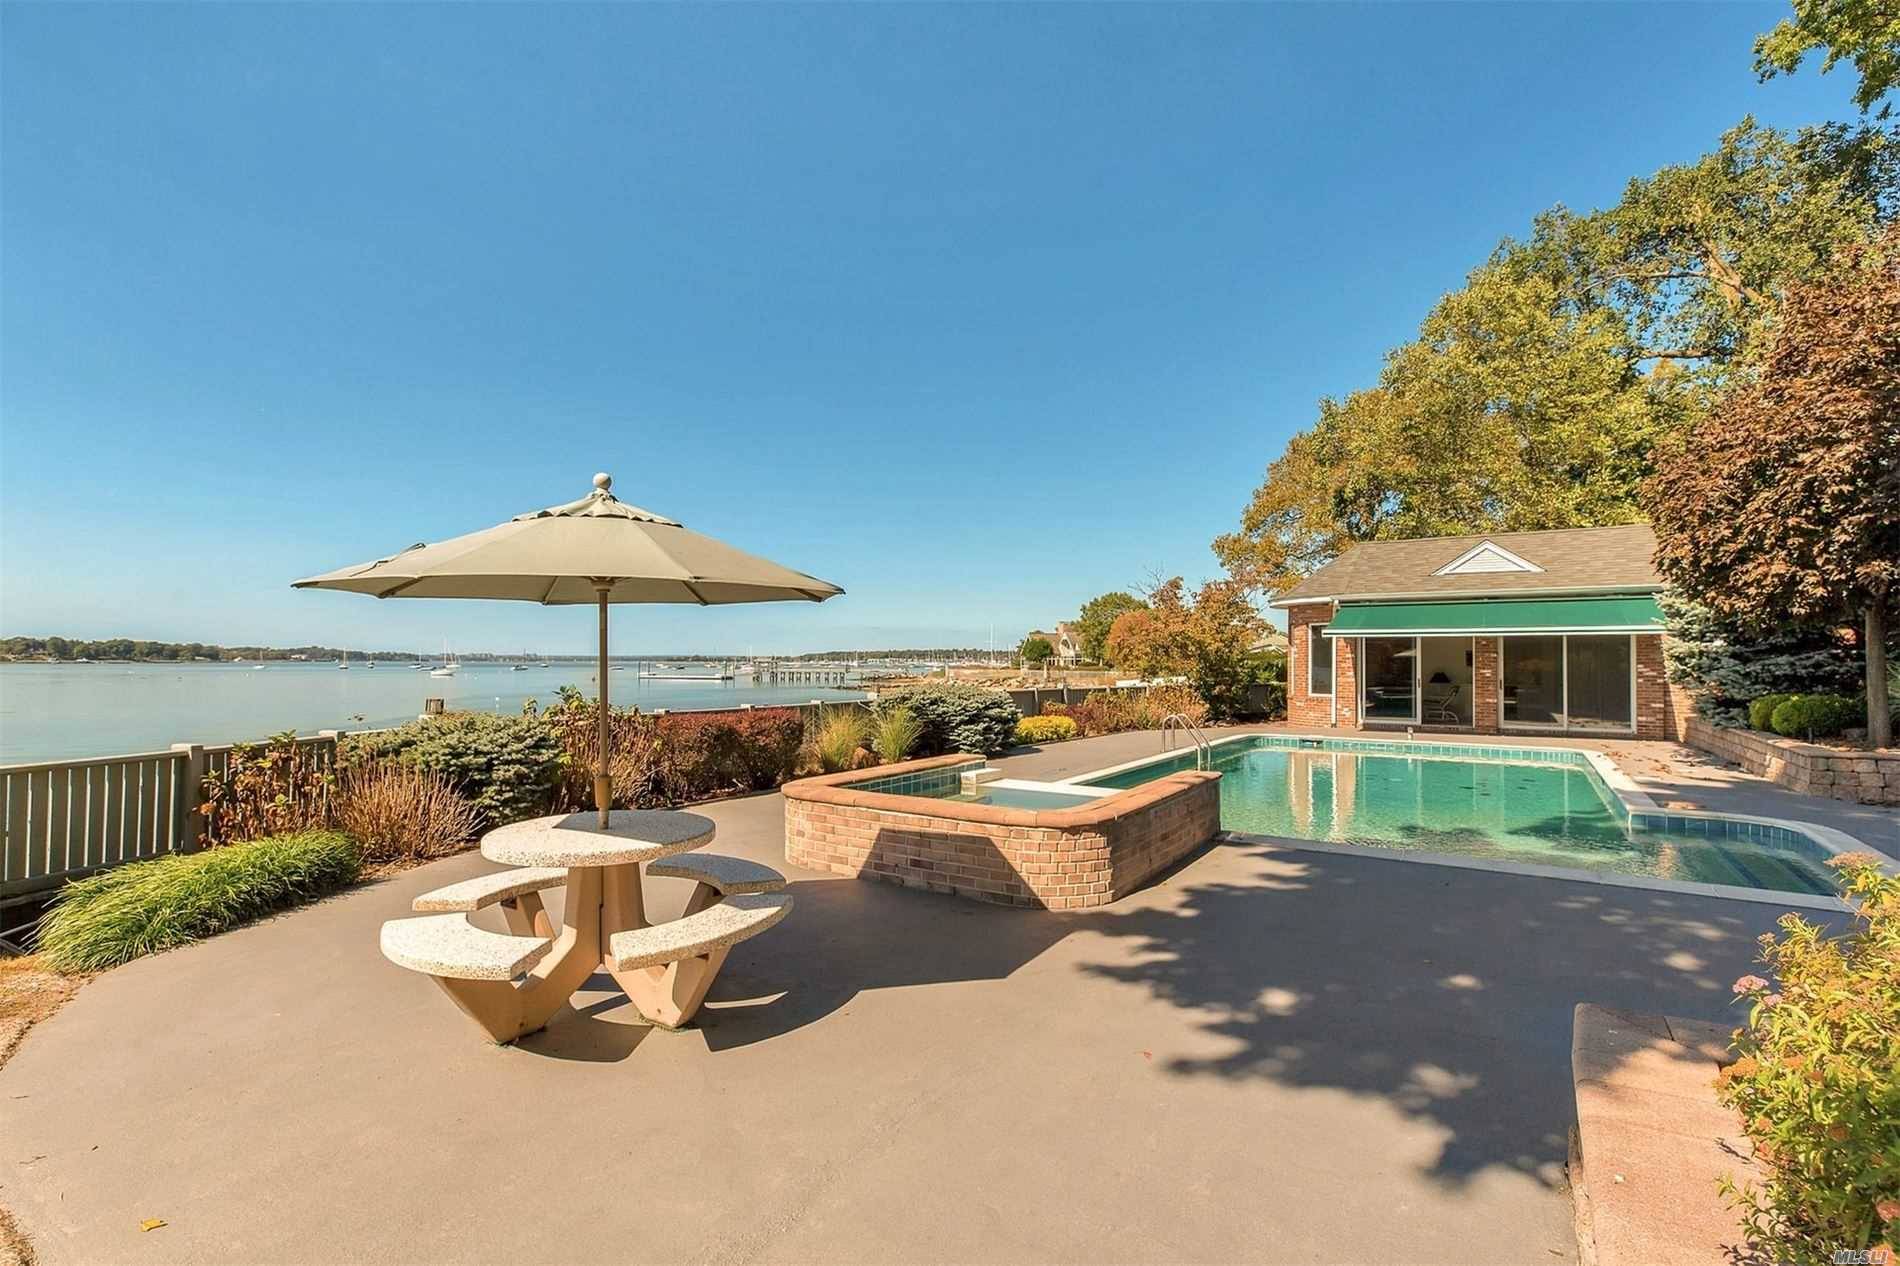 Rare opportunity to own spectacular waterfront property on 1.